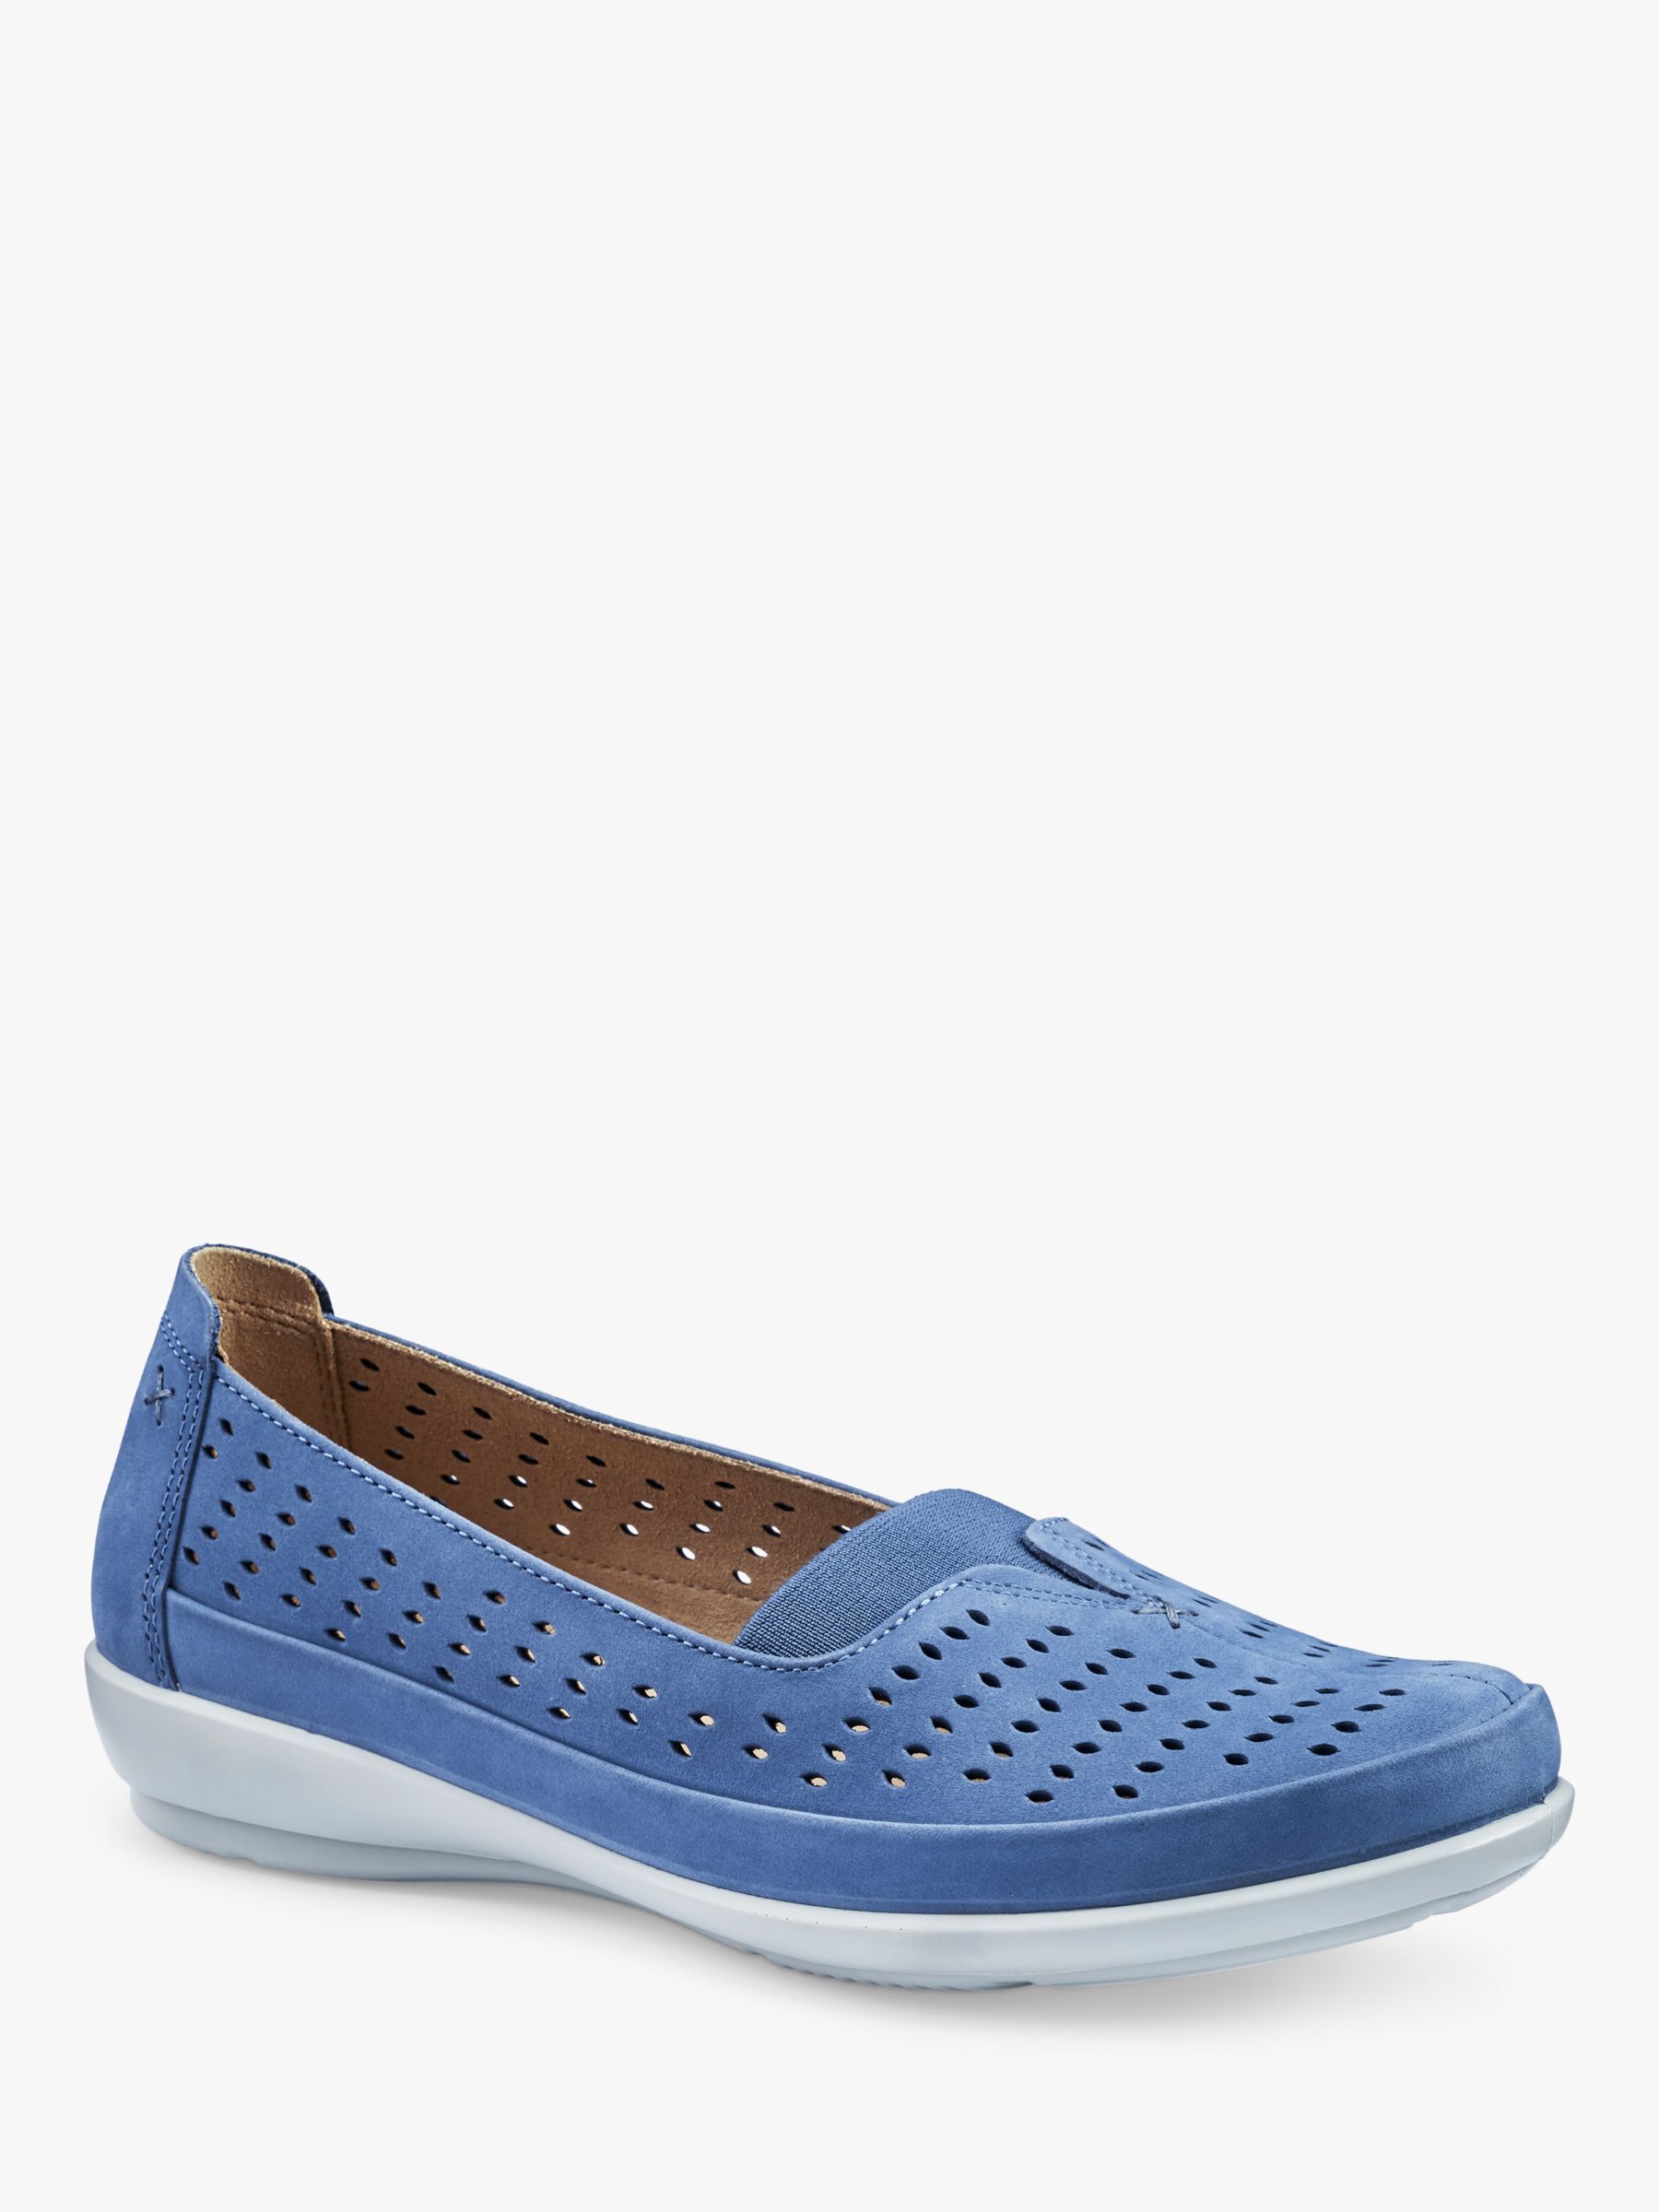 Buy Hotter Eternity Perforated Slip-On Flexible Shoes, Elemental Blue Online at johnlewis.com